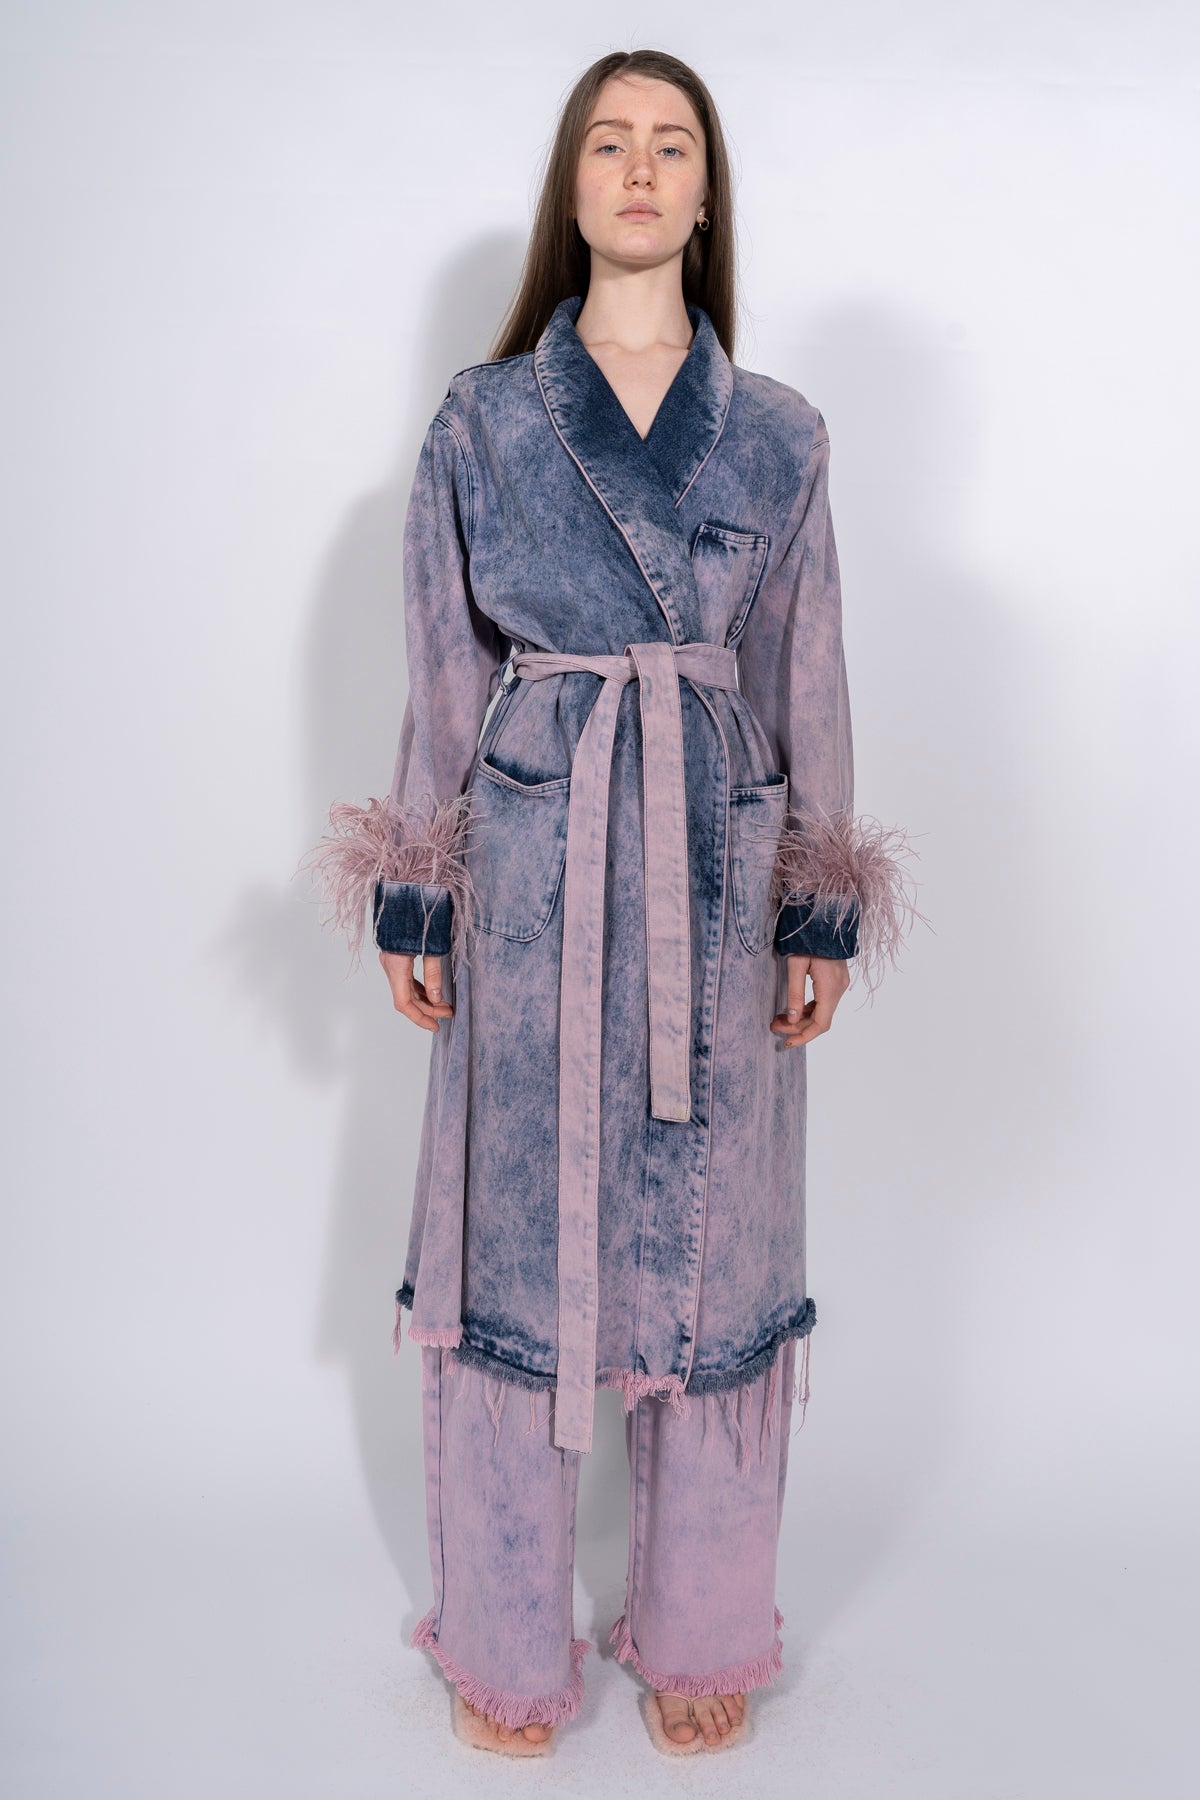 DRESSING GOWN STYLE COAT WITH FEATHERS INSERT – MARQUES ' ALMEIDA